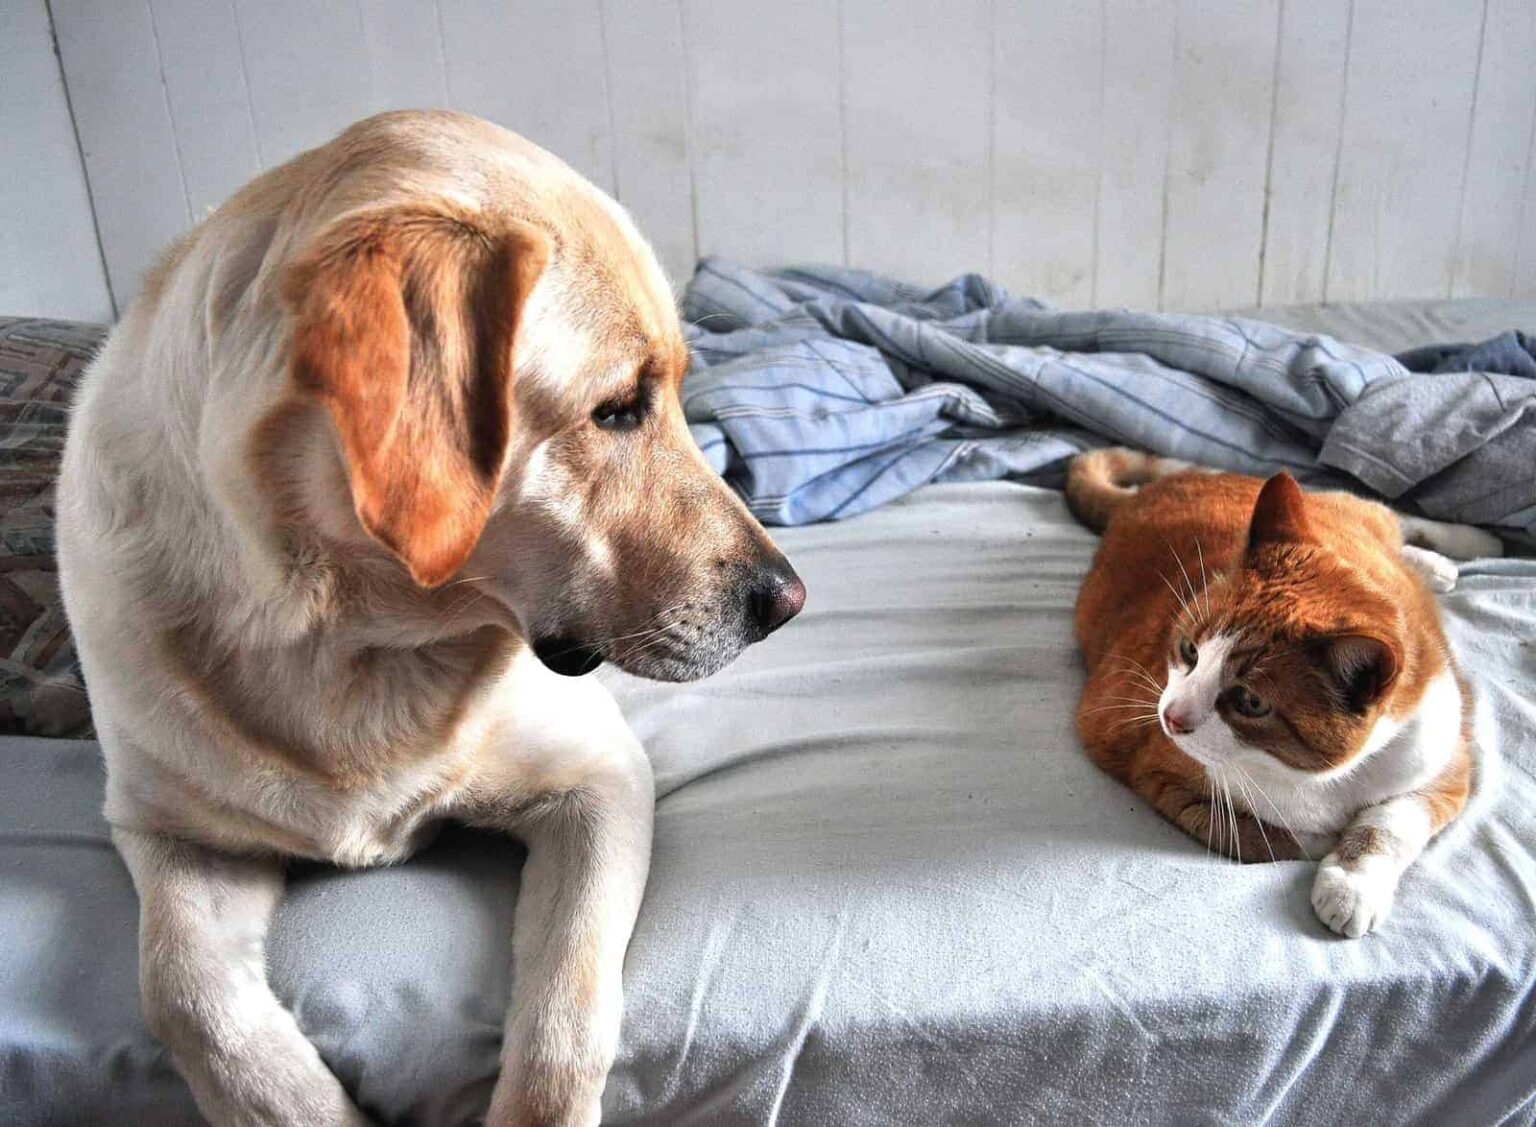 Is Your Dog Suddenly Aggressive Towards Cats? 5 Main Reasons